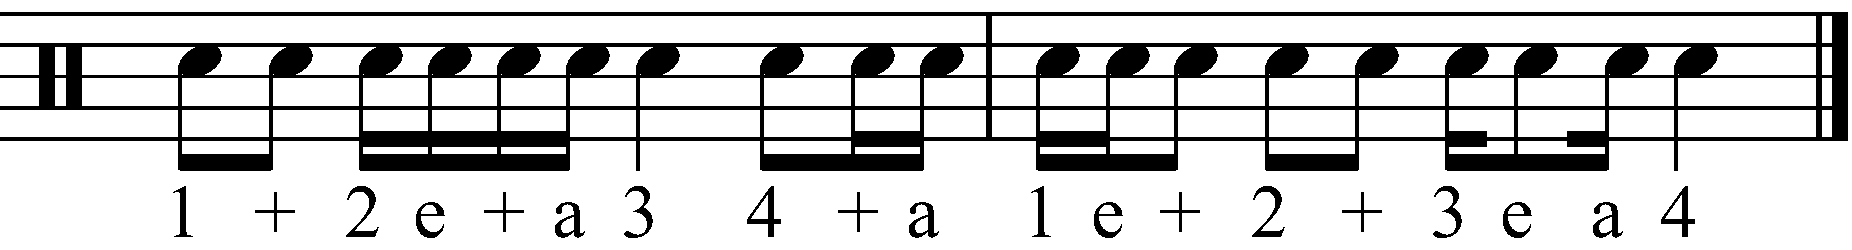 An example snare drum rhythm with counting.